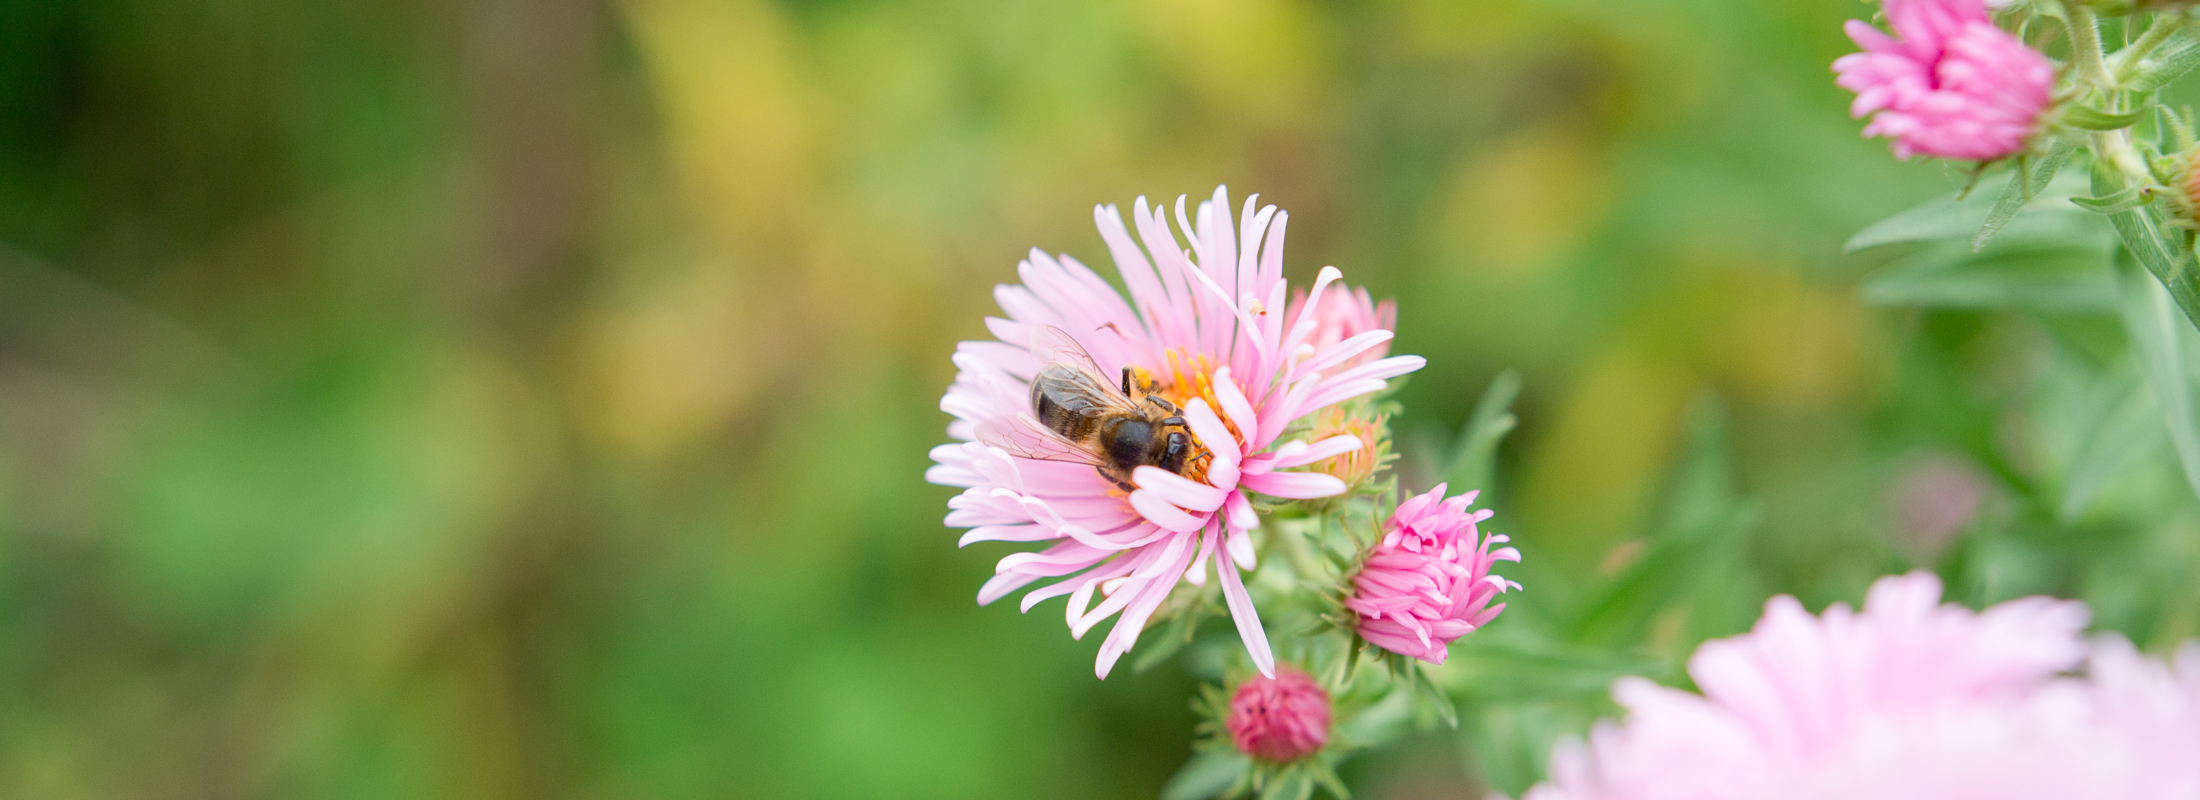 A bee sitting in a pink flower, with a background of green